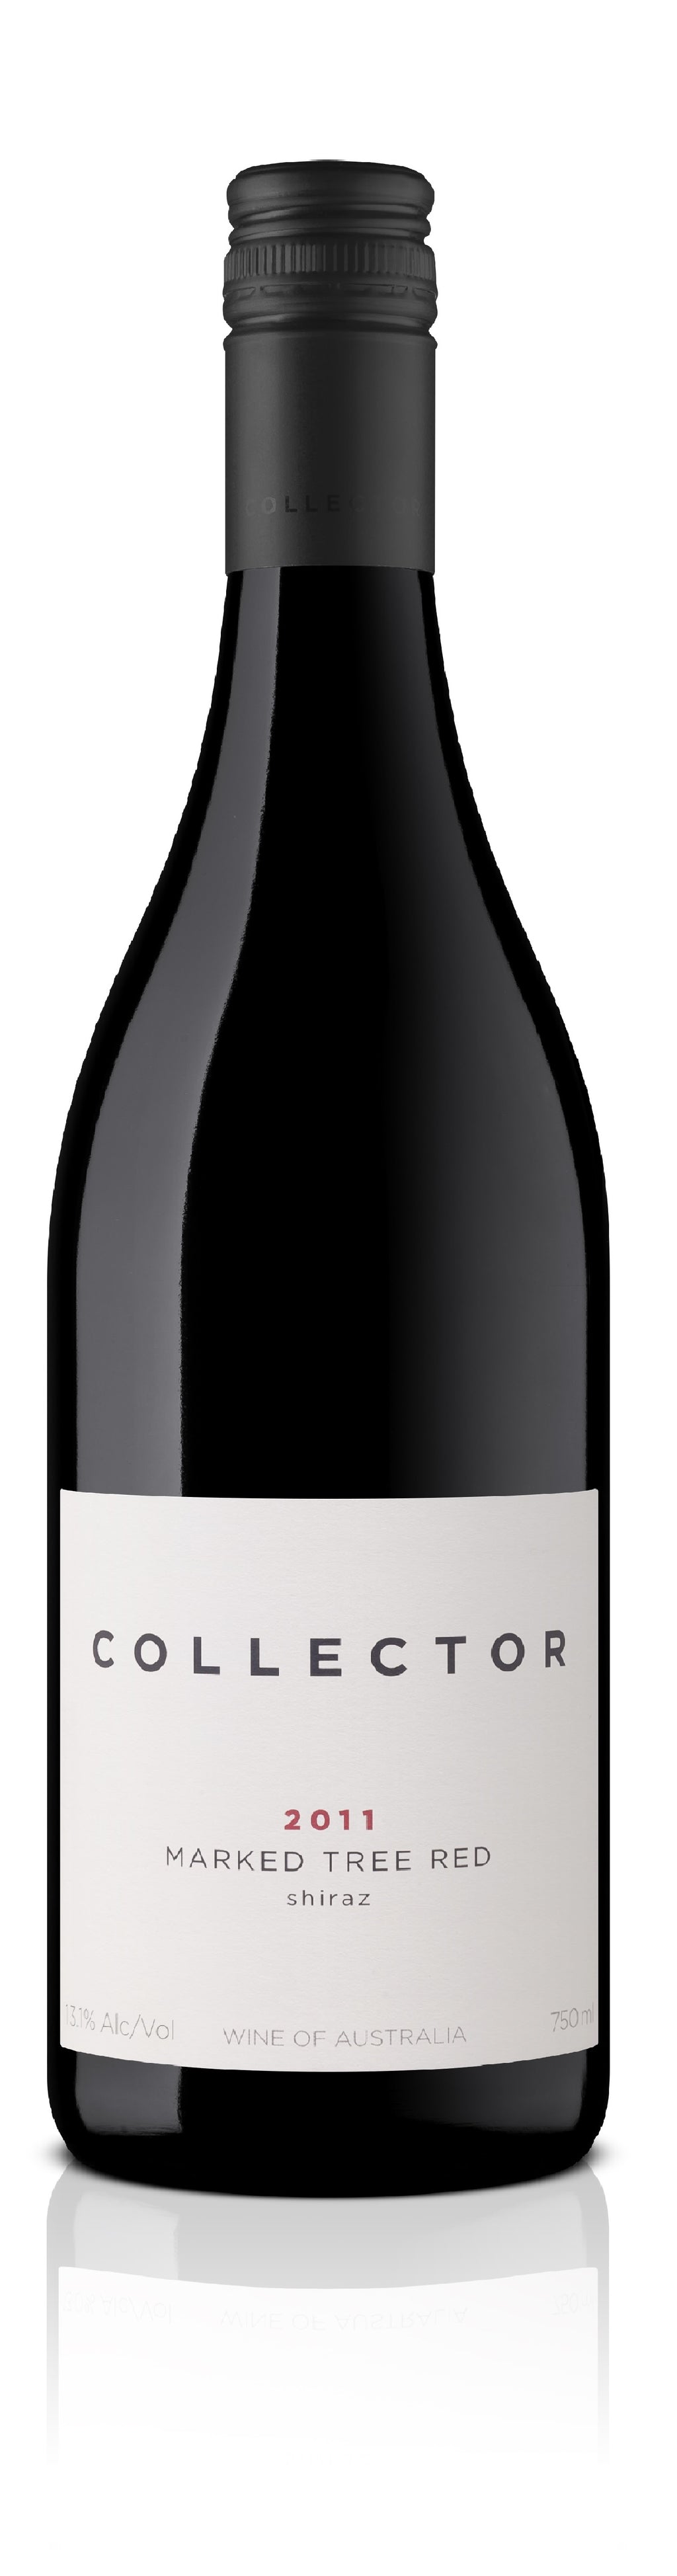 Wine Club Exclusive Museum Release - Marked Tree Red Shiraz 2011